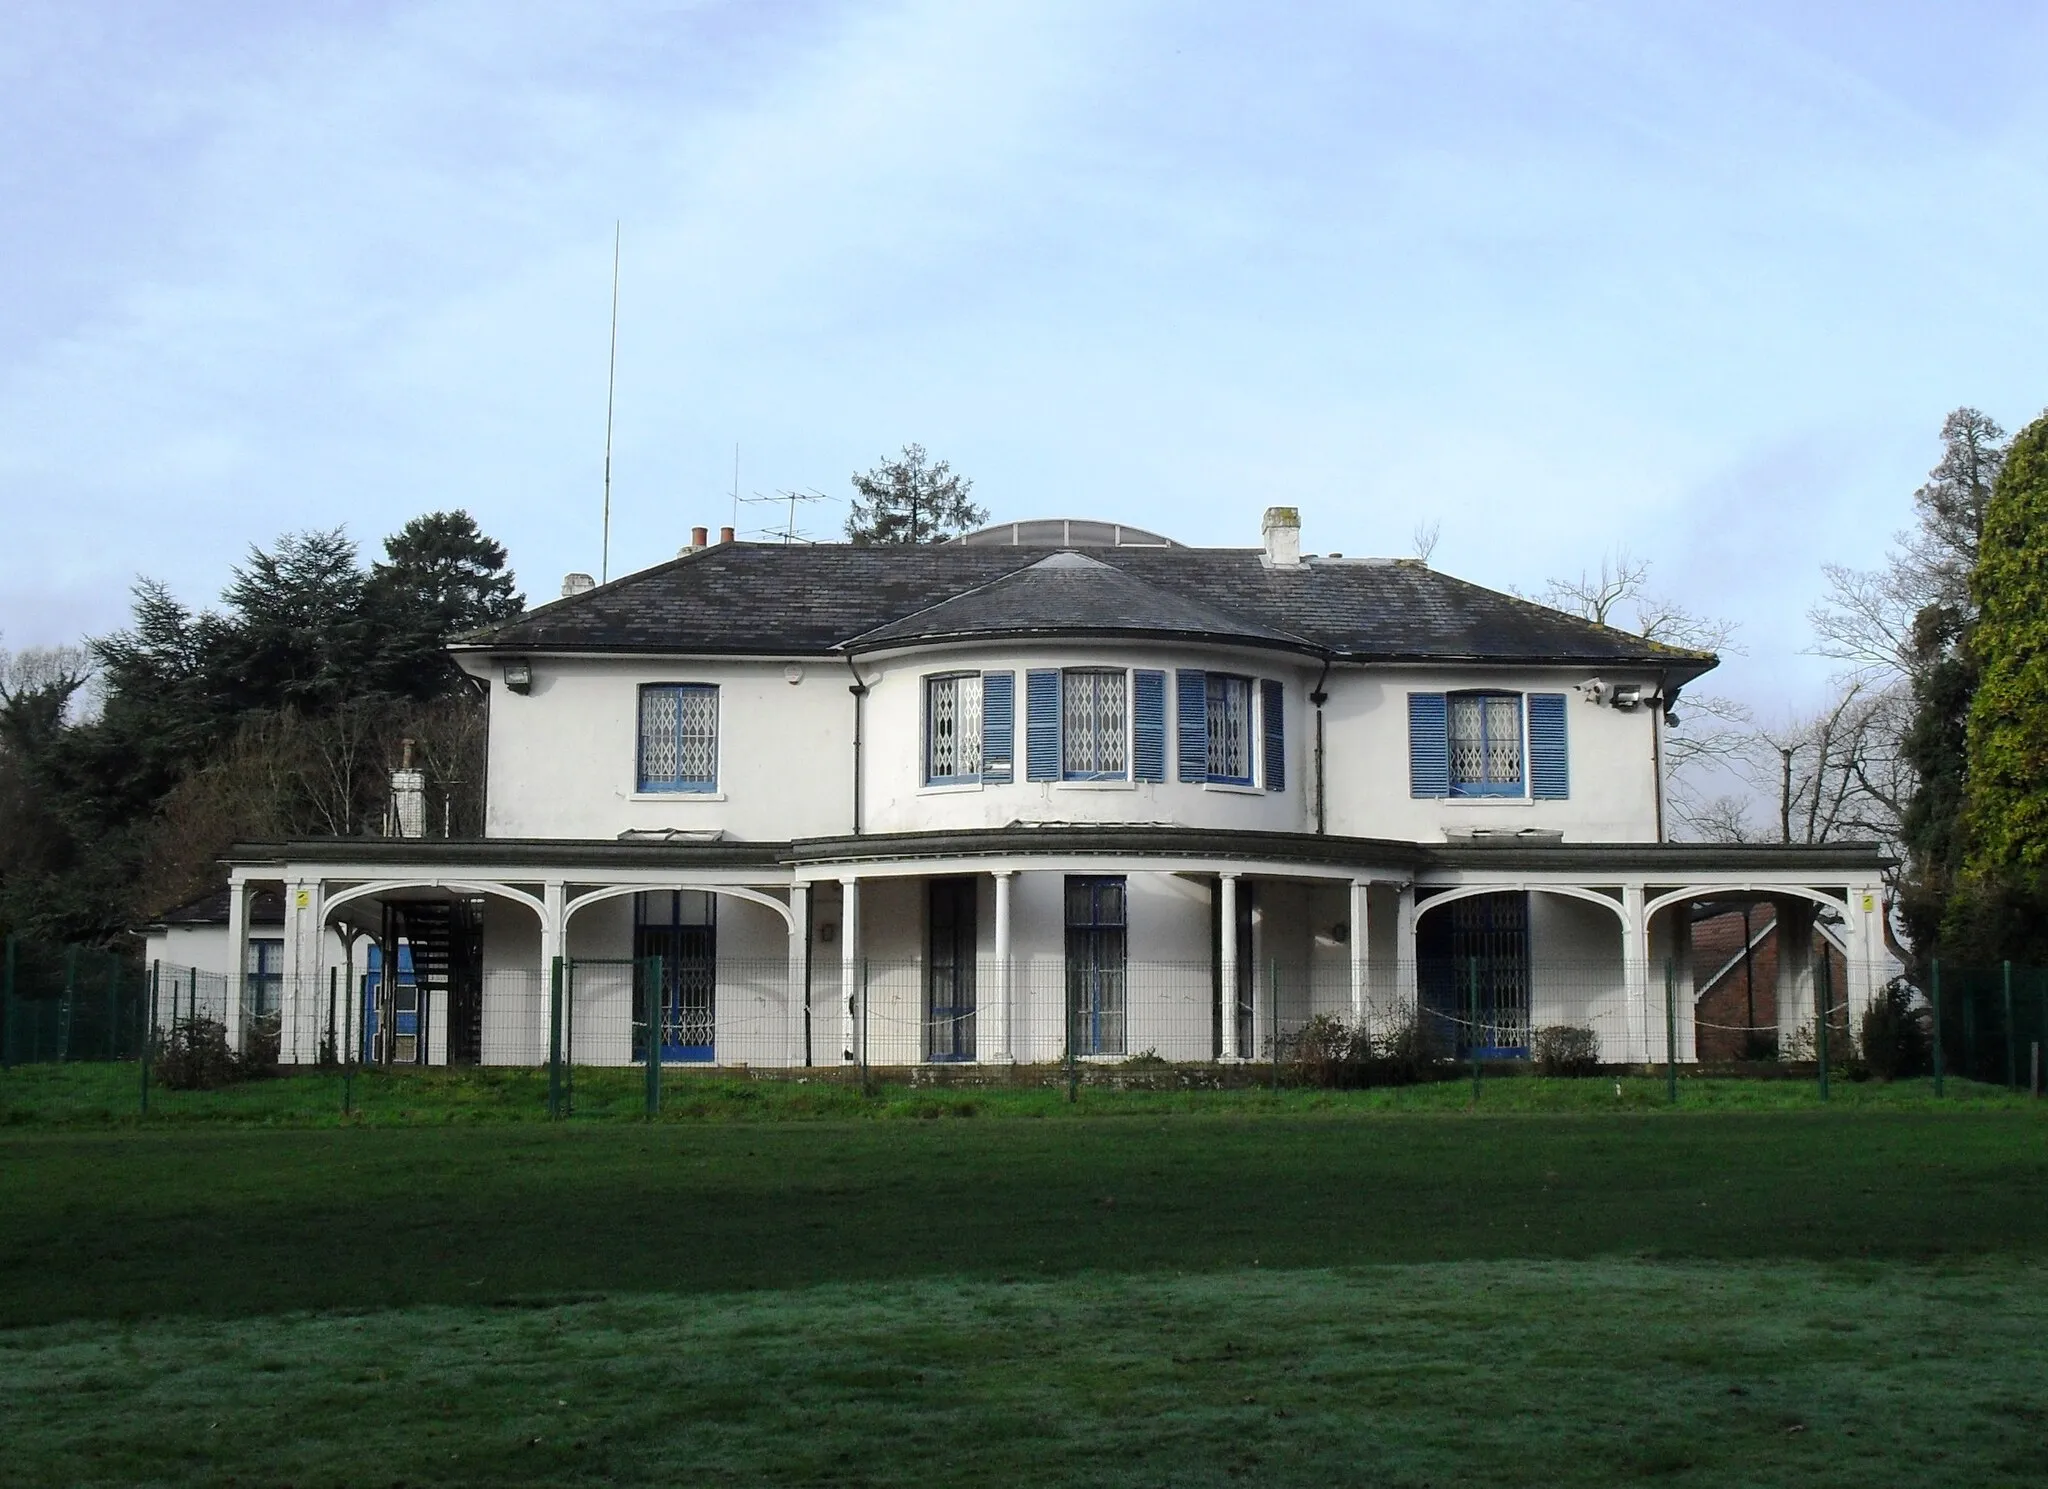 Photo showing: Broadfield House, Broadfield, Crawley, West Sussex, England.  Built in the 1830s and extended in the 1860s.  Disused as of 2009, but planning permission has been granted for conversion into flats. Listed at Grade II by English Heritage (IoE Code 363333)